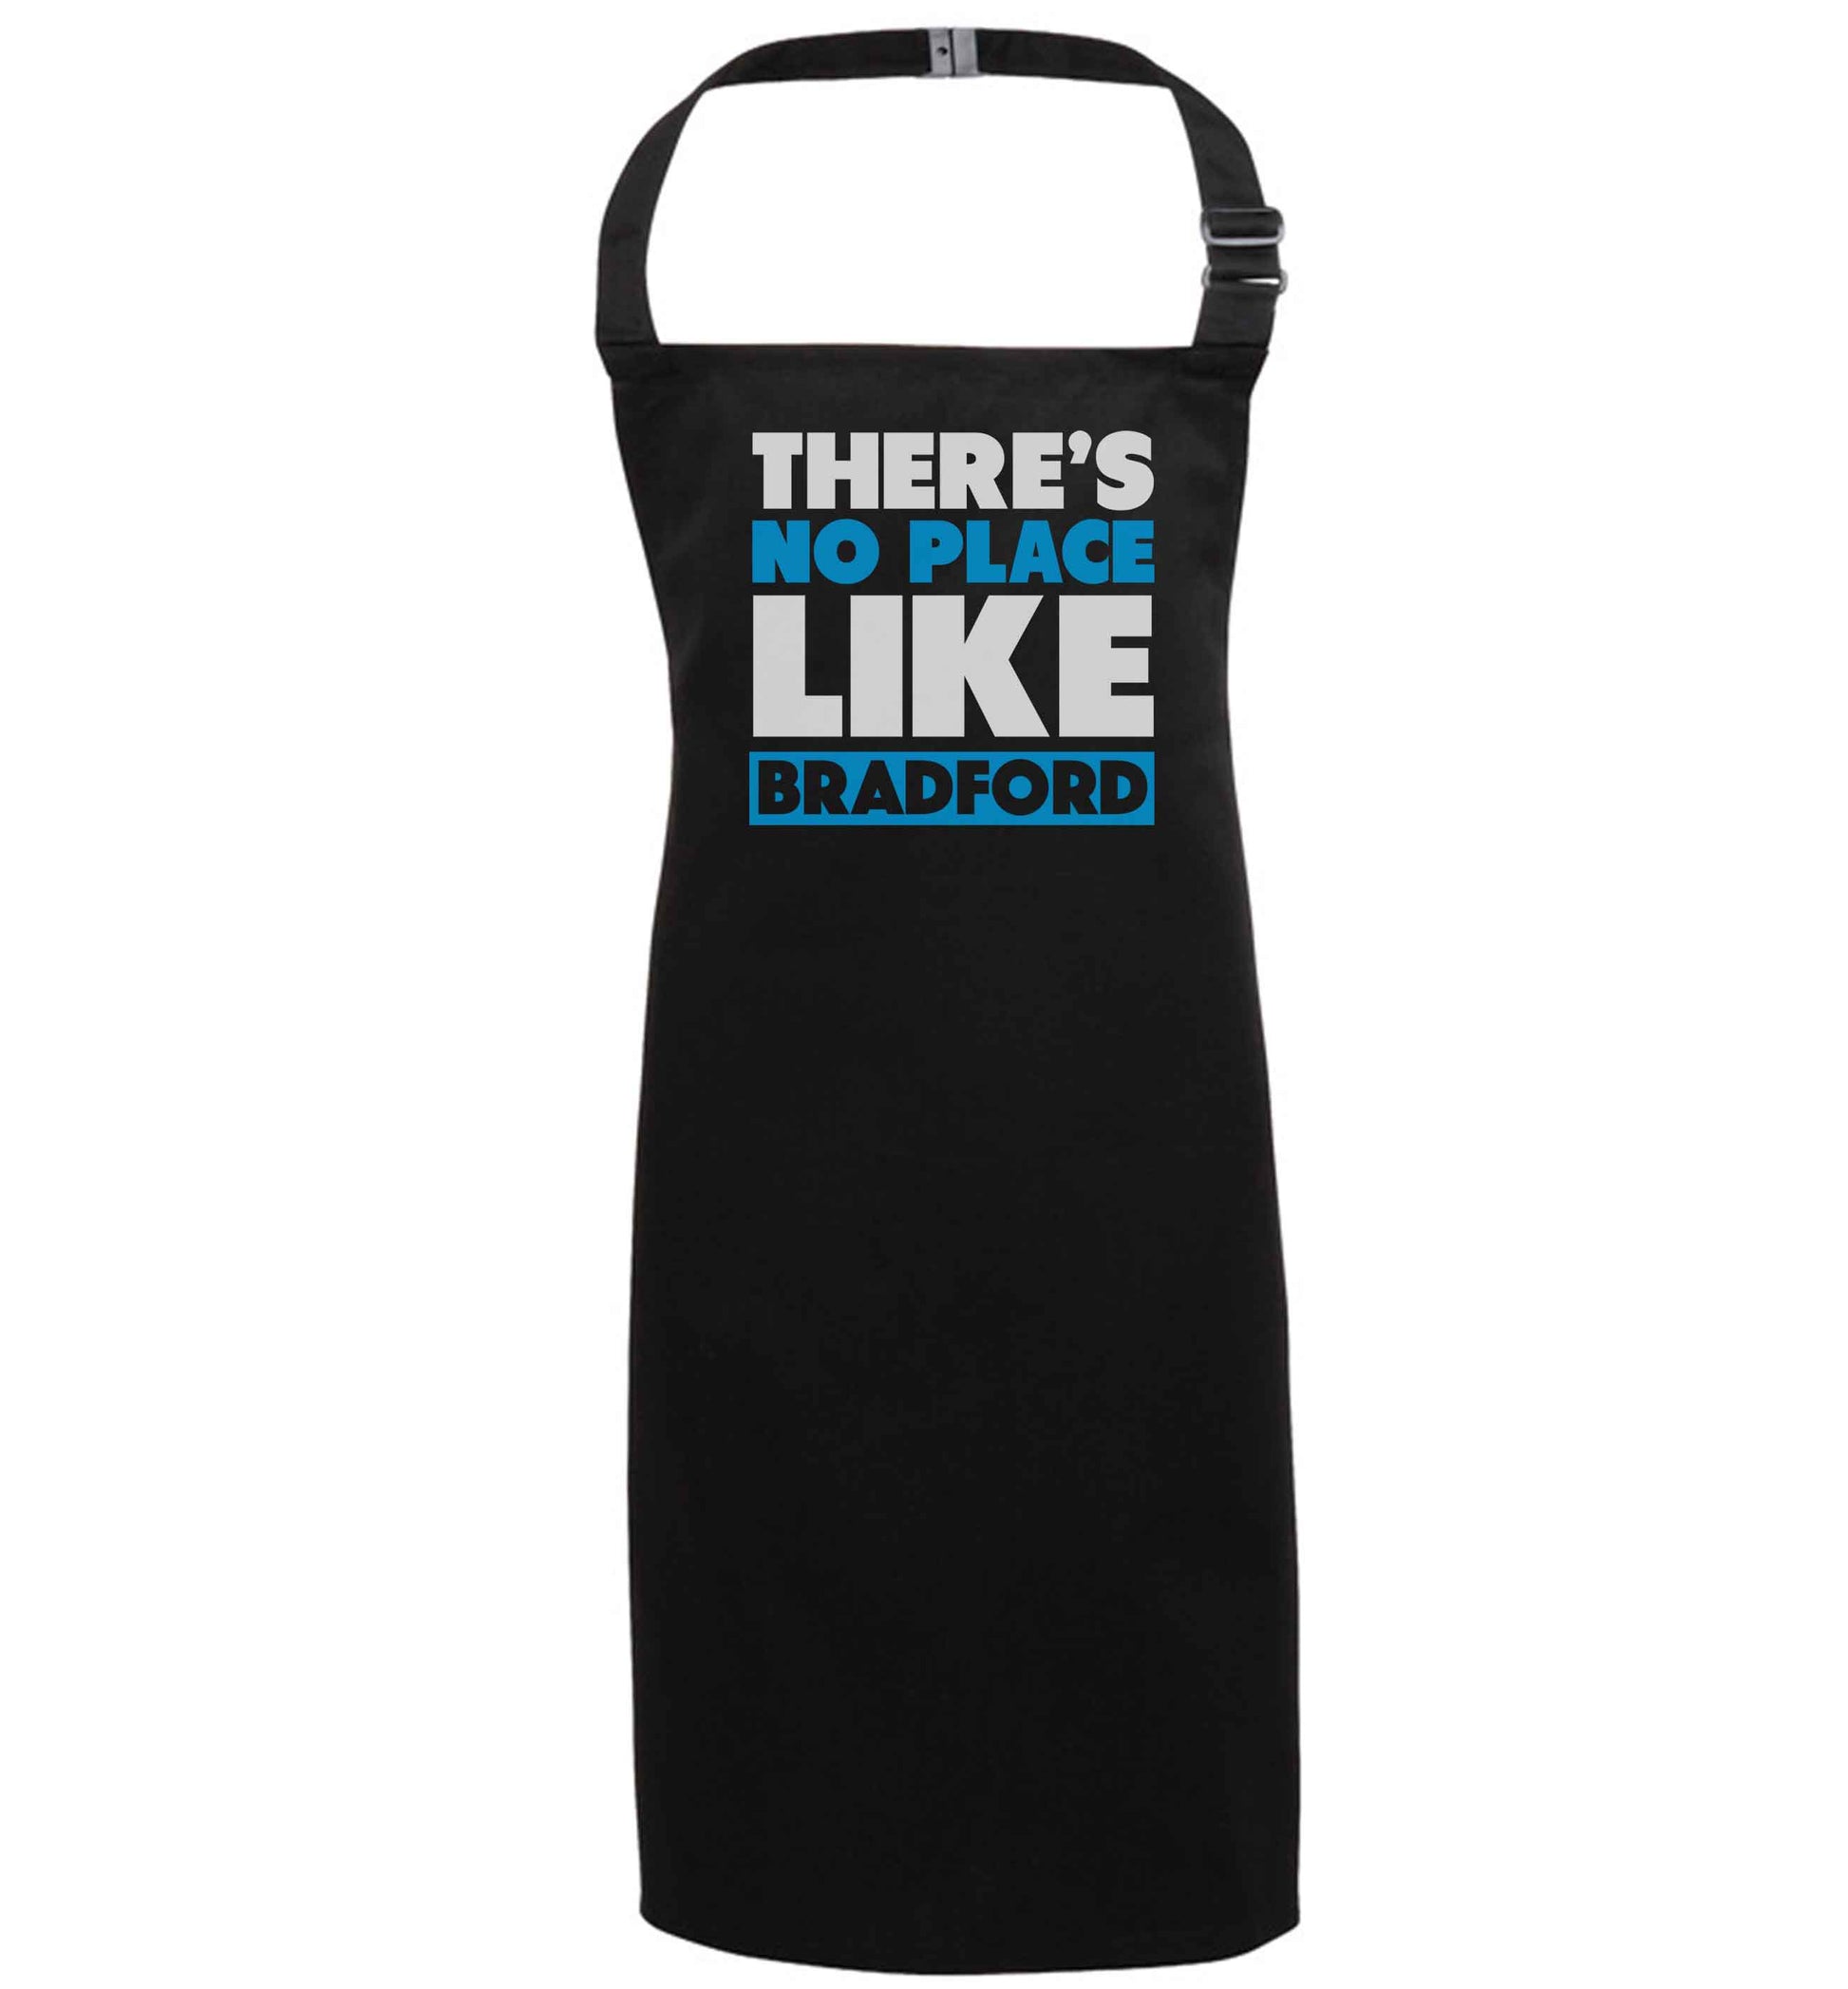 There's no place like Bradford black apron 7-10 years